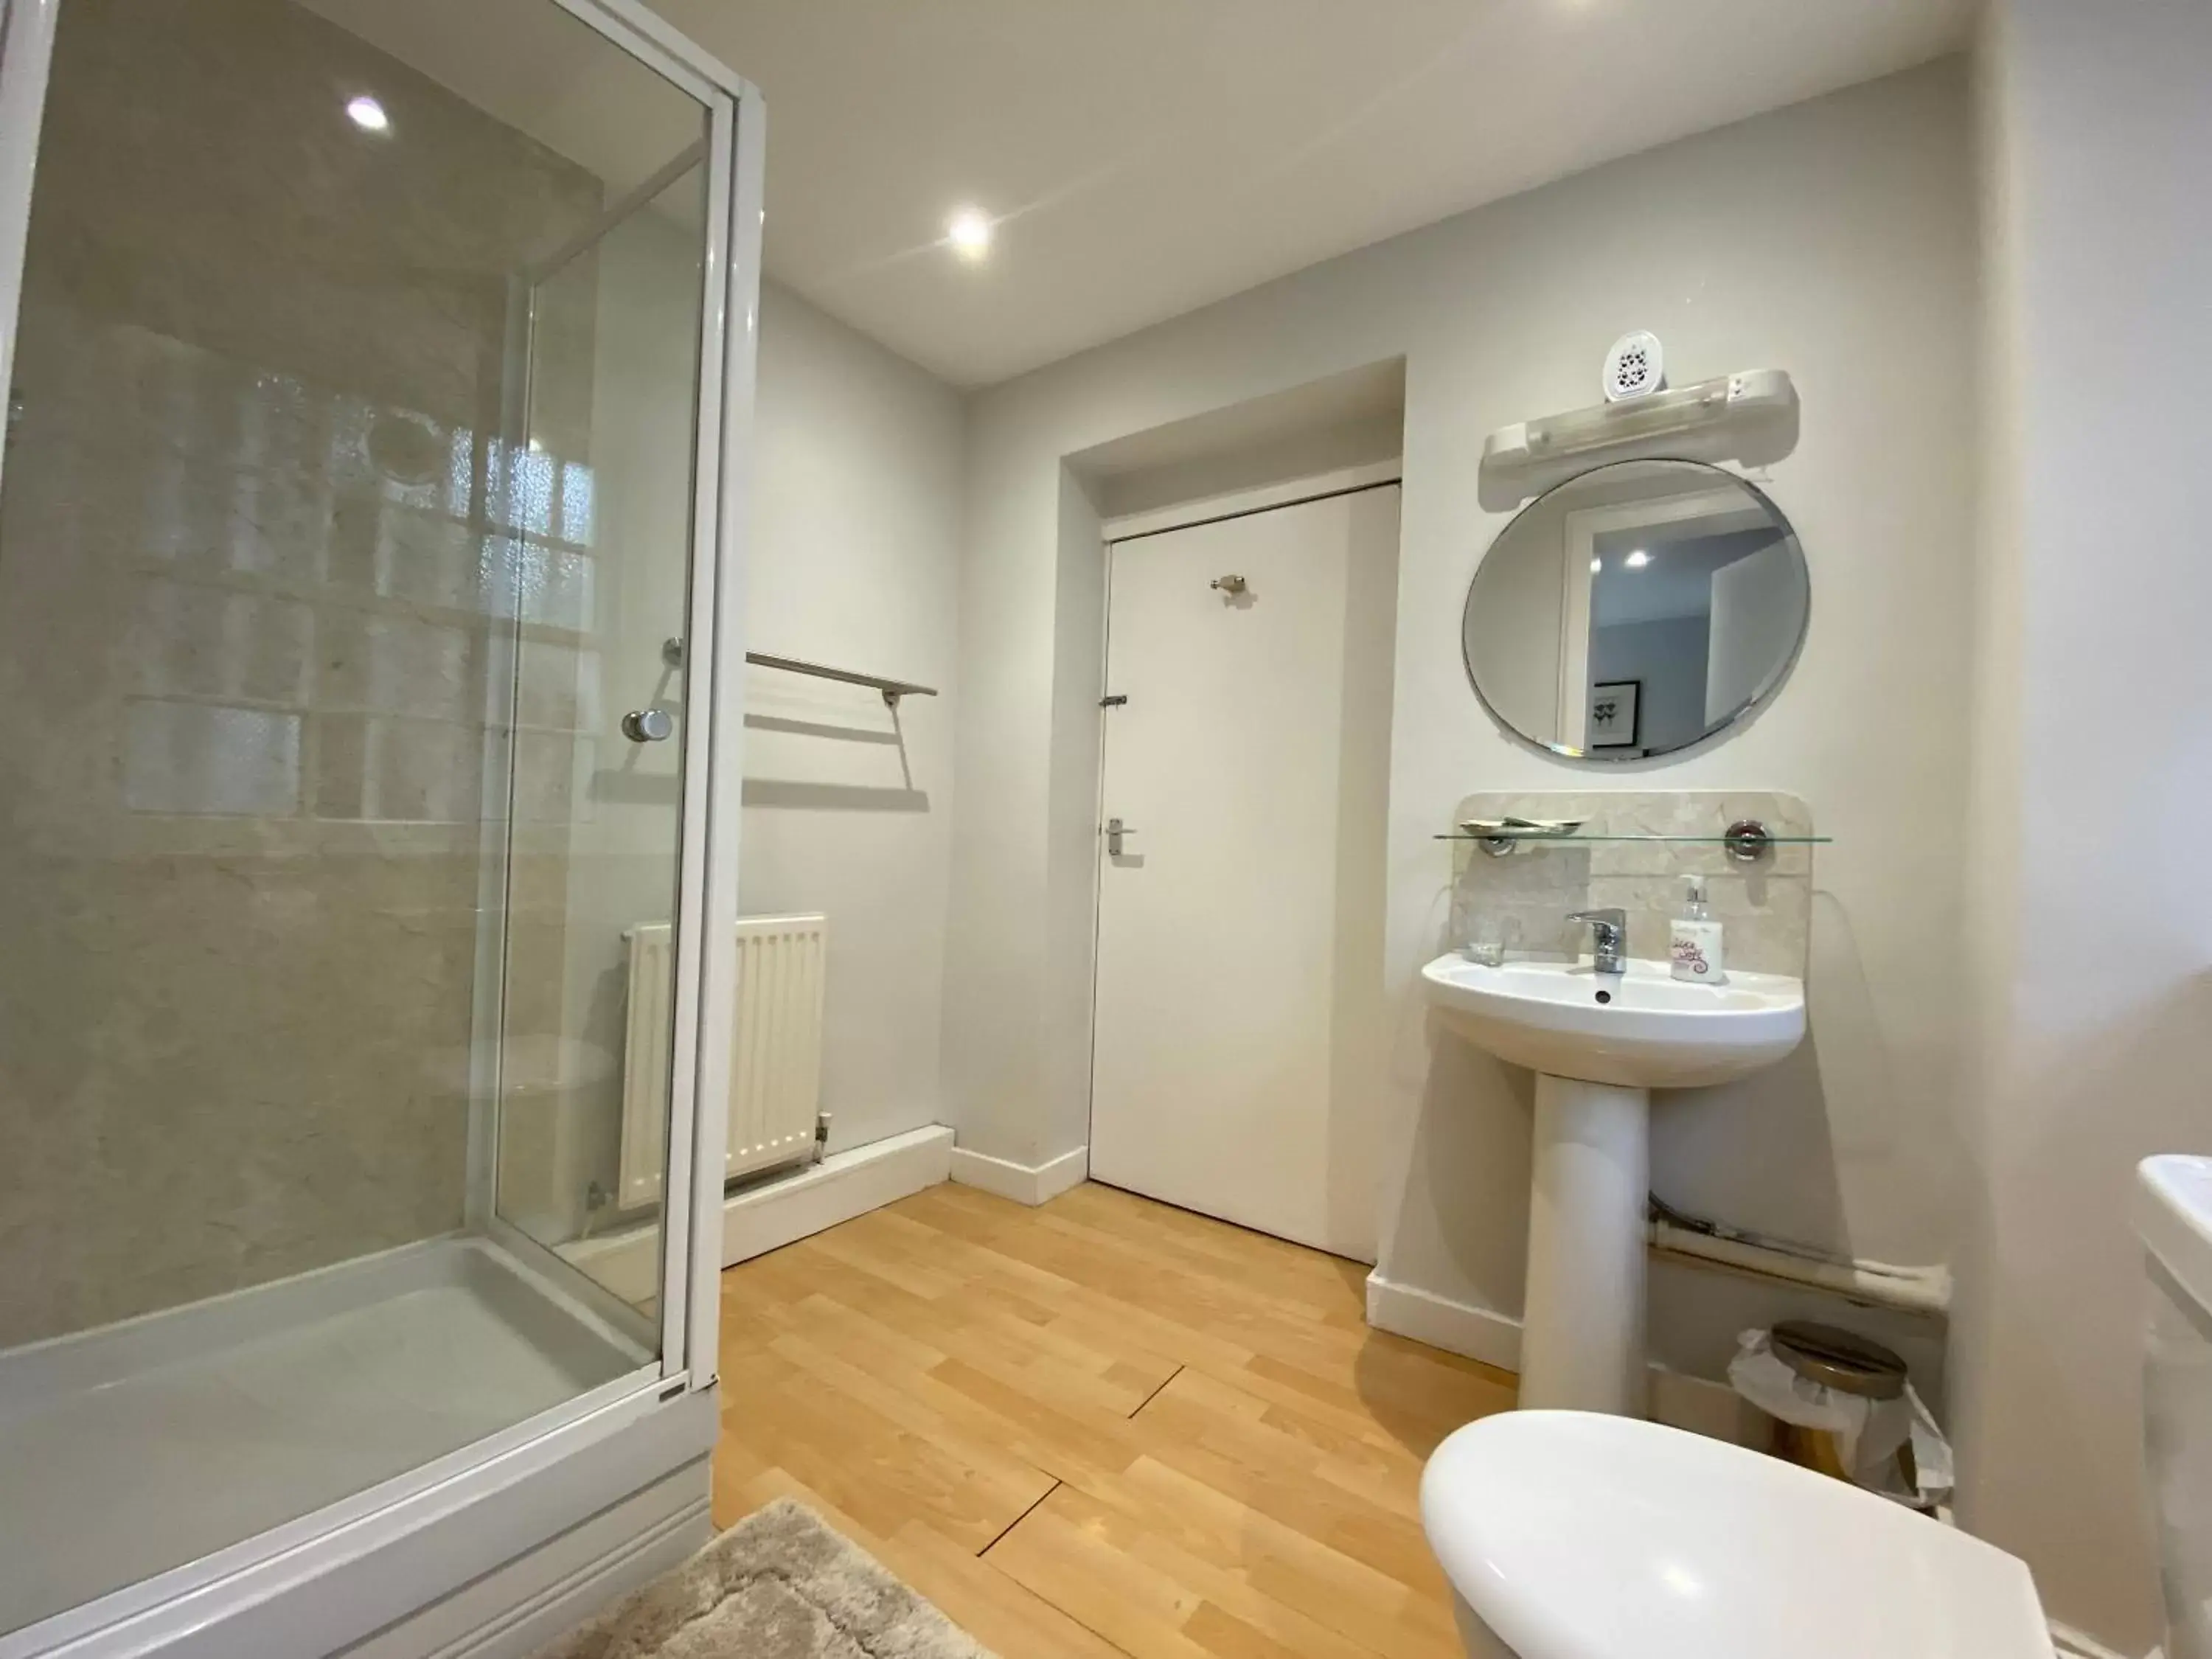 Bathroom in Park View House